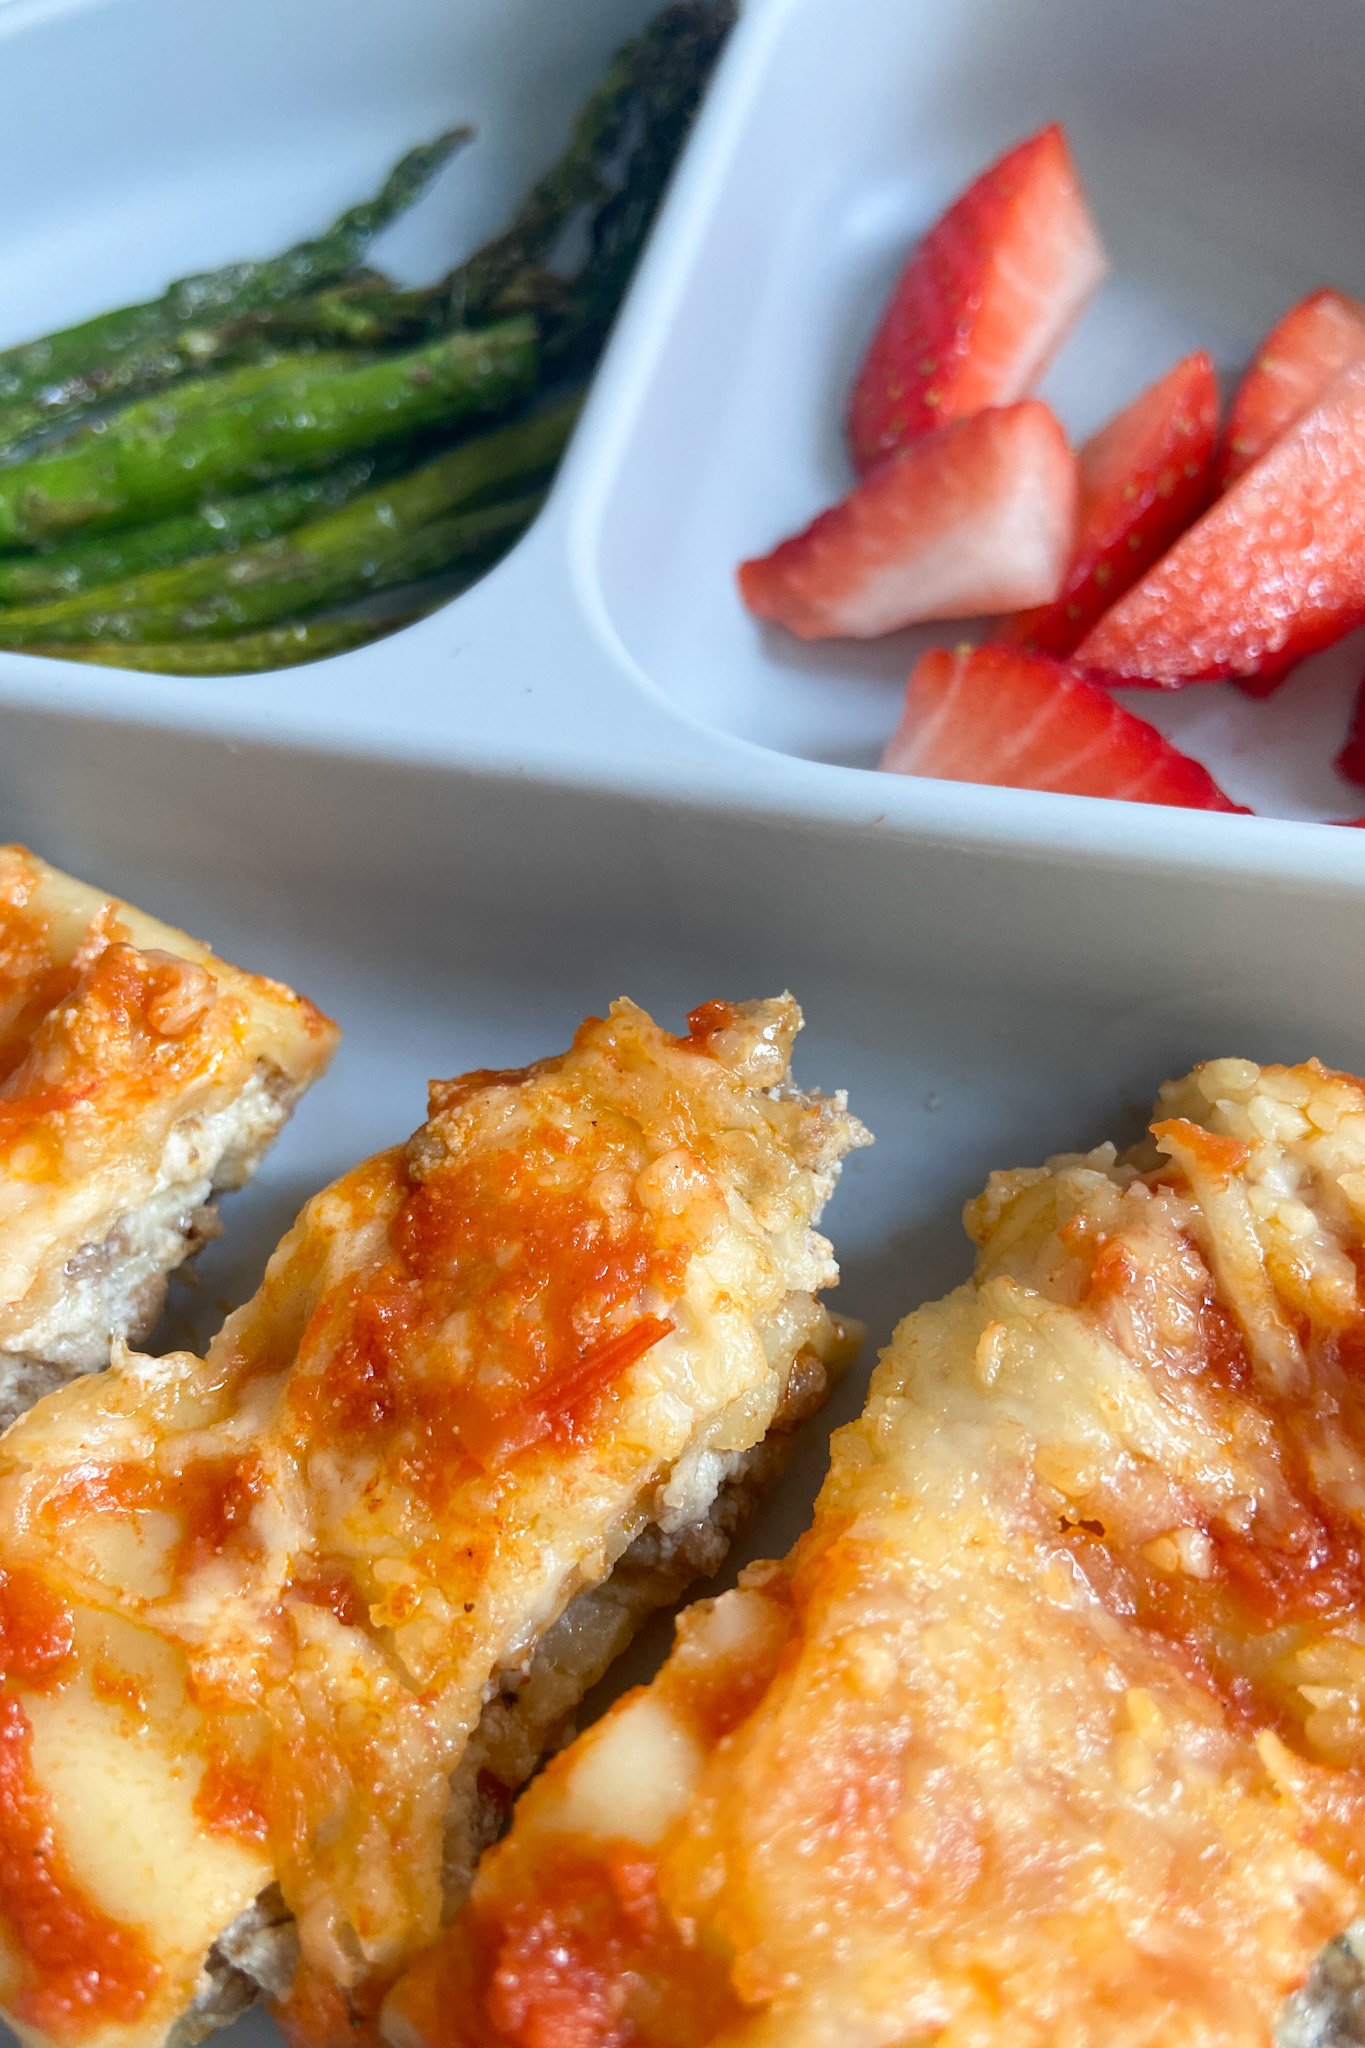 Cheesy beef manicotti served with asparagus and sliced strawberries